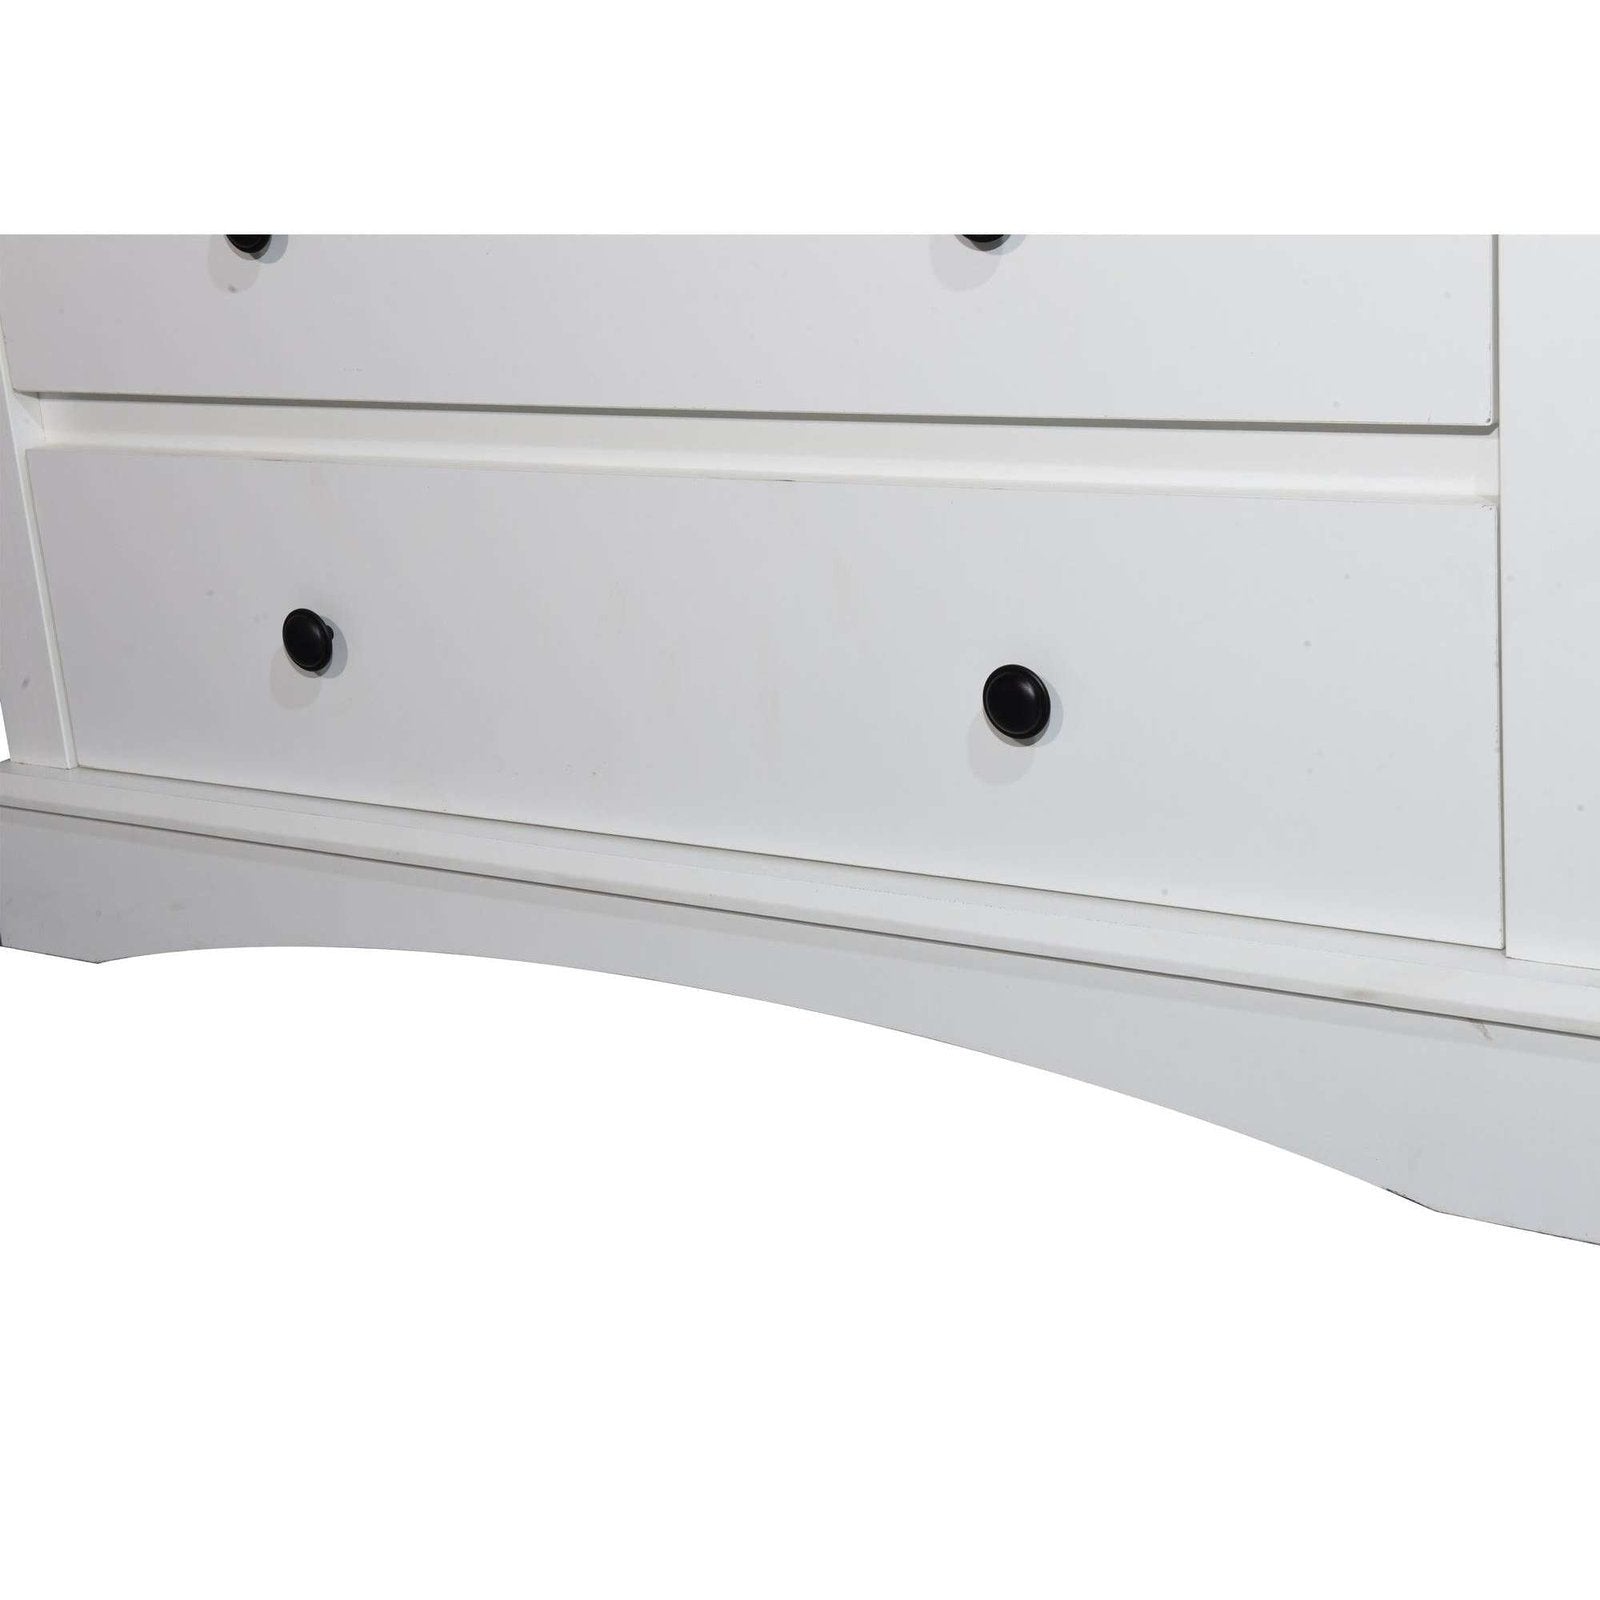 Carden Drawer Chest allhomely